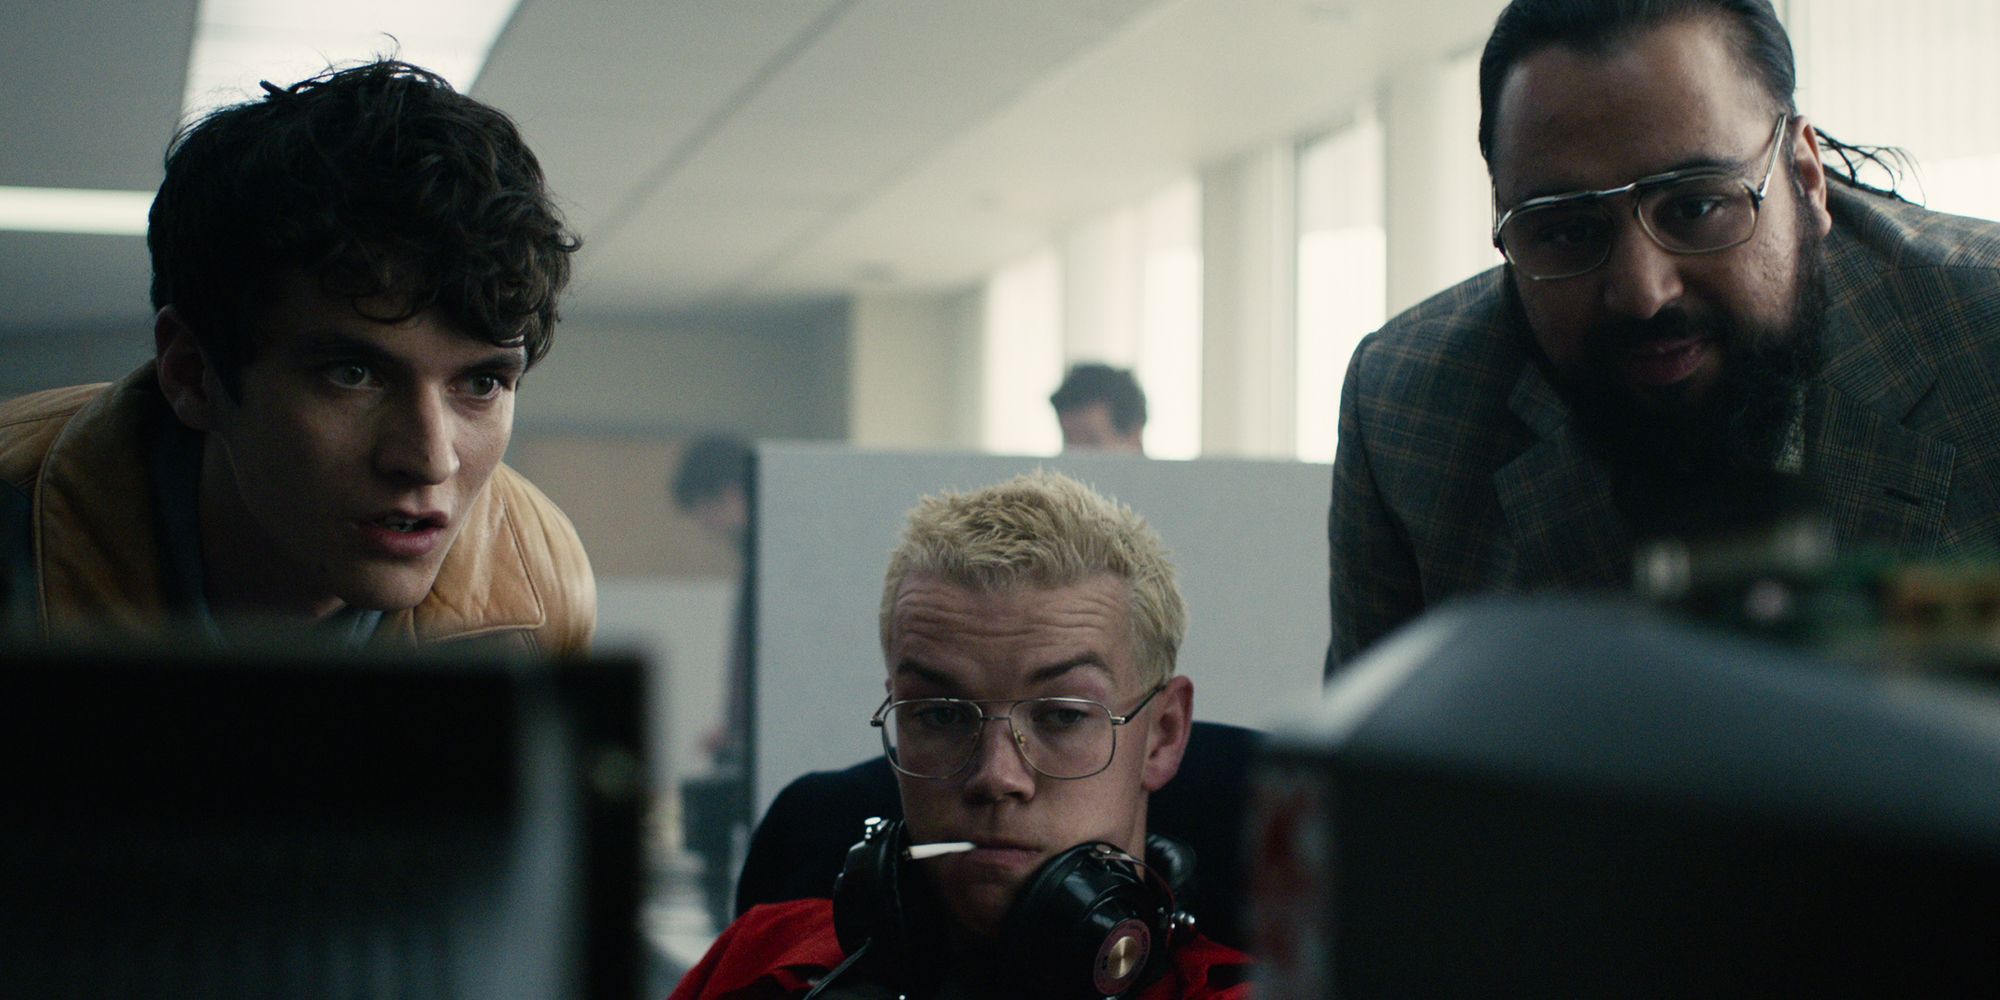 Fionn Whitehead Will Poulter and Asim Chaudhry in Black Mirror Bandersnatch Netflix